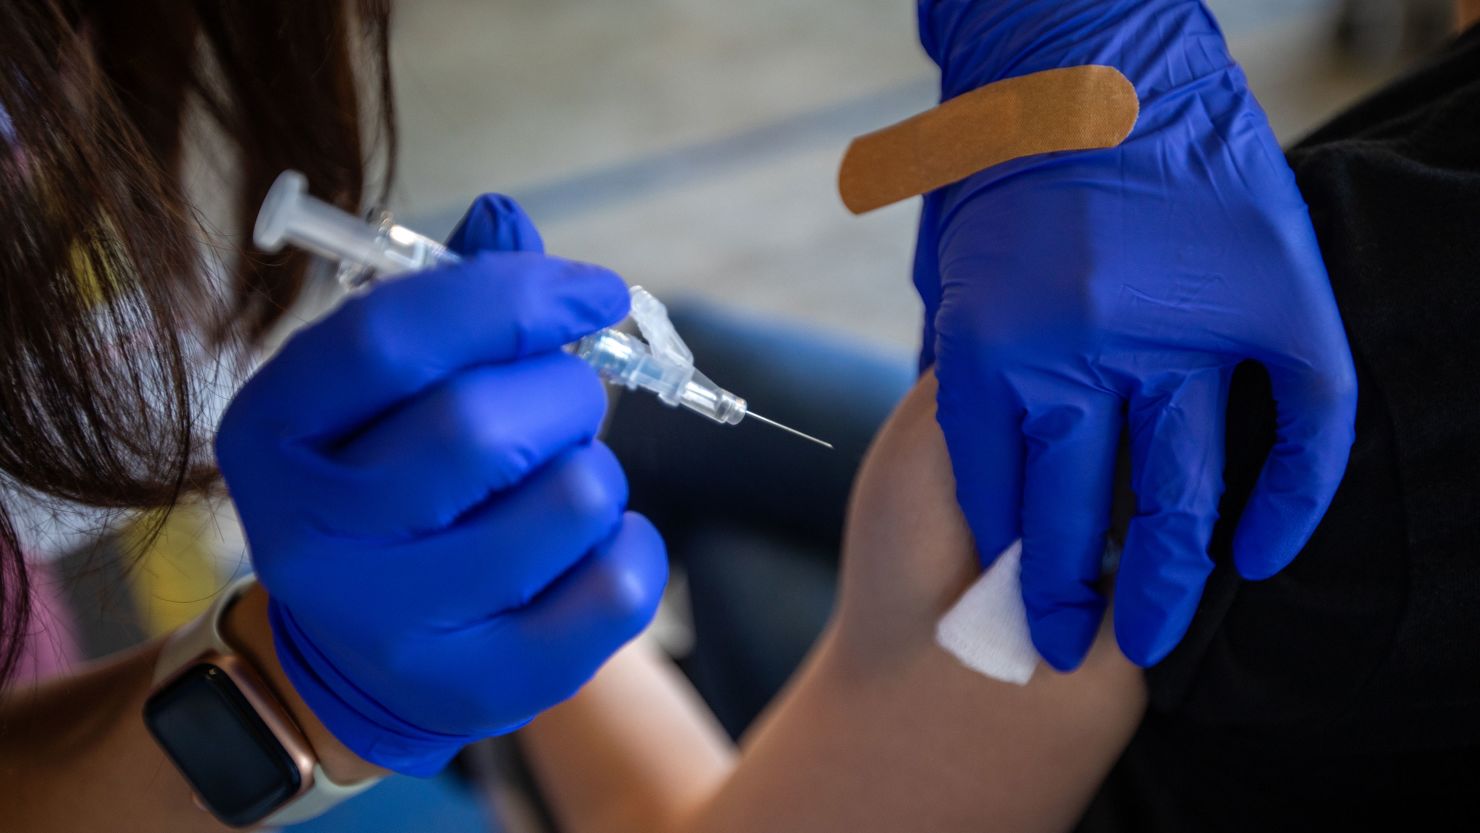 Only about 23% of US adults and 14% of children have gotten the latest Covid-19 vaccine, according to data from the US Centers for Disease Control and Prevention.